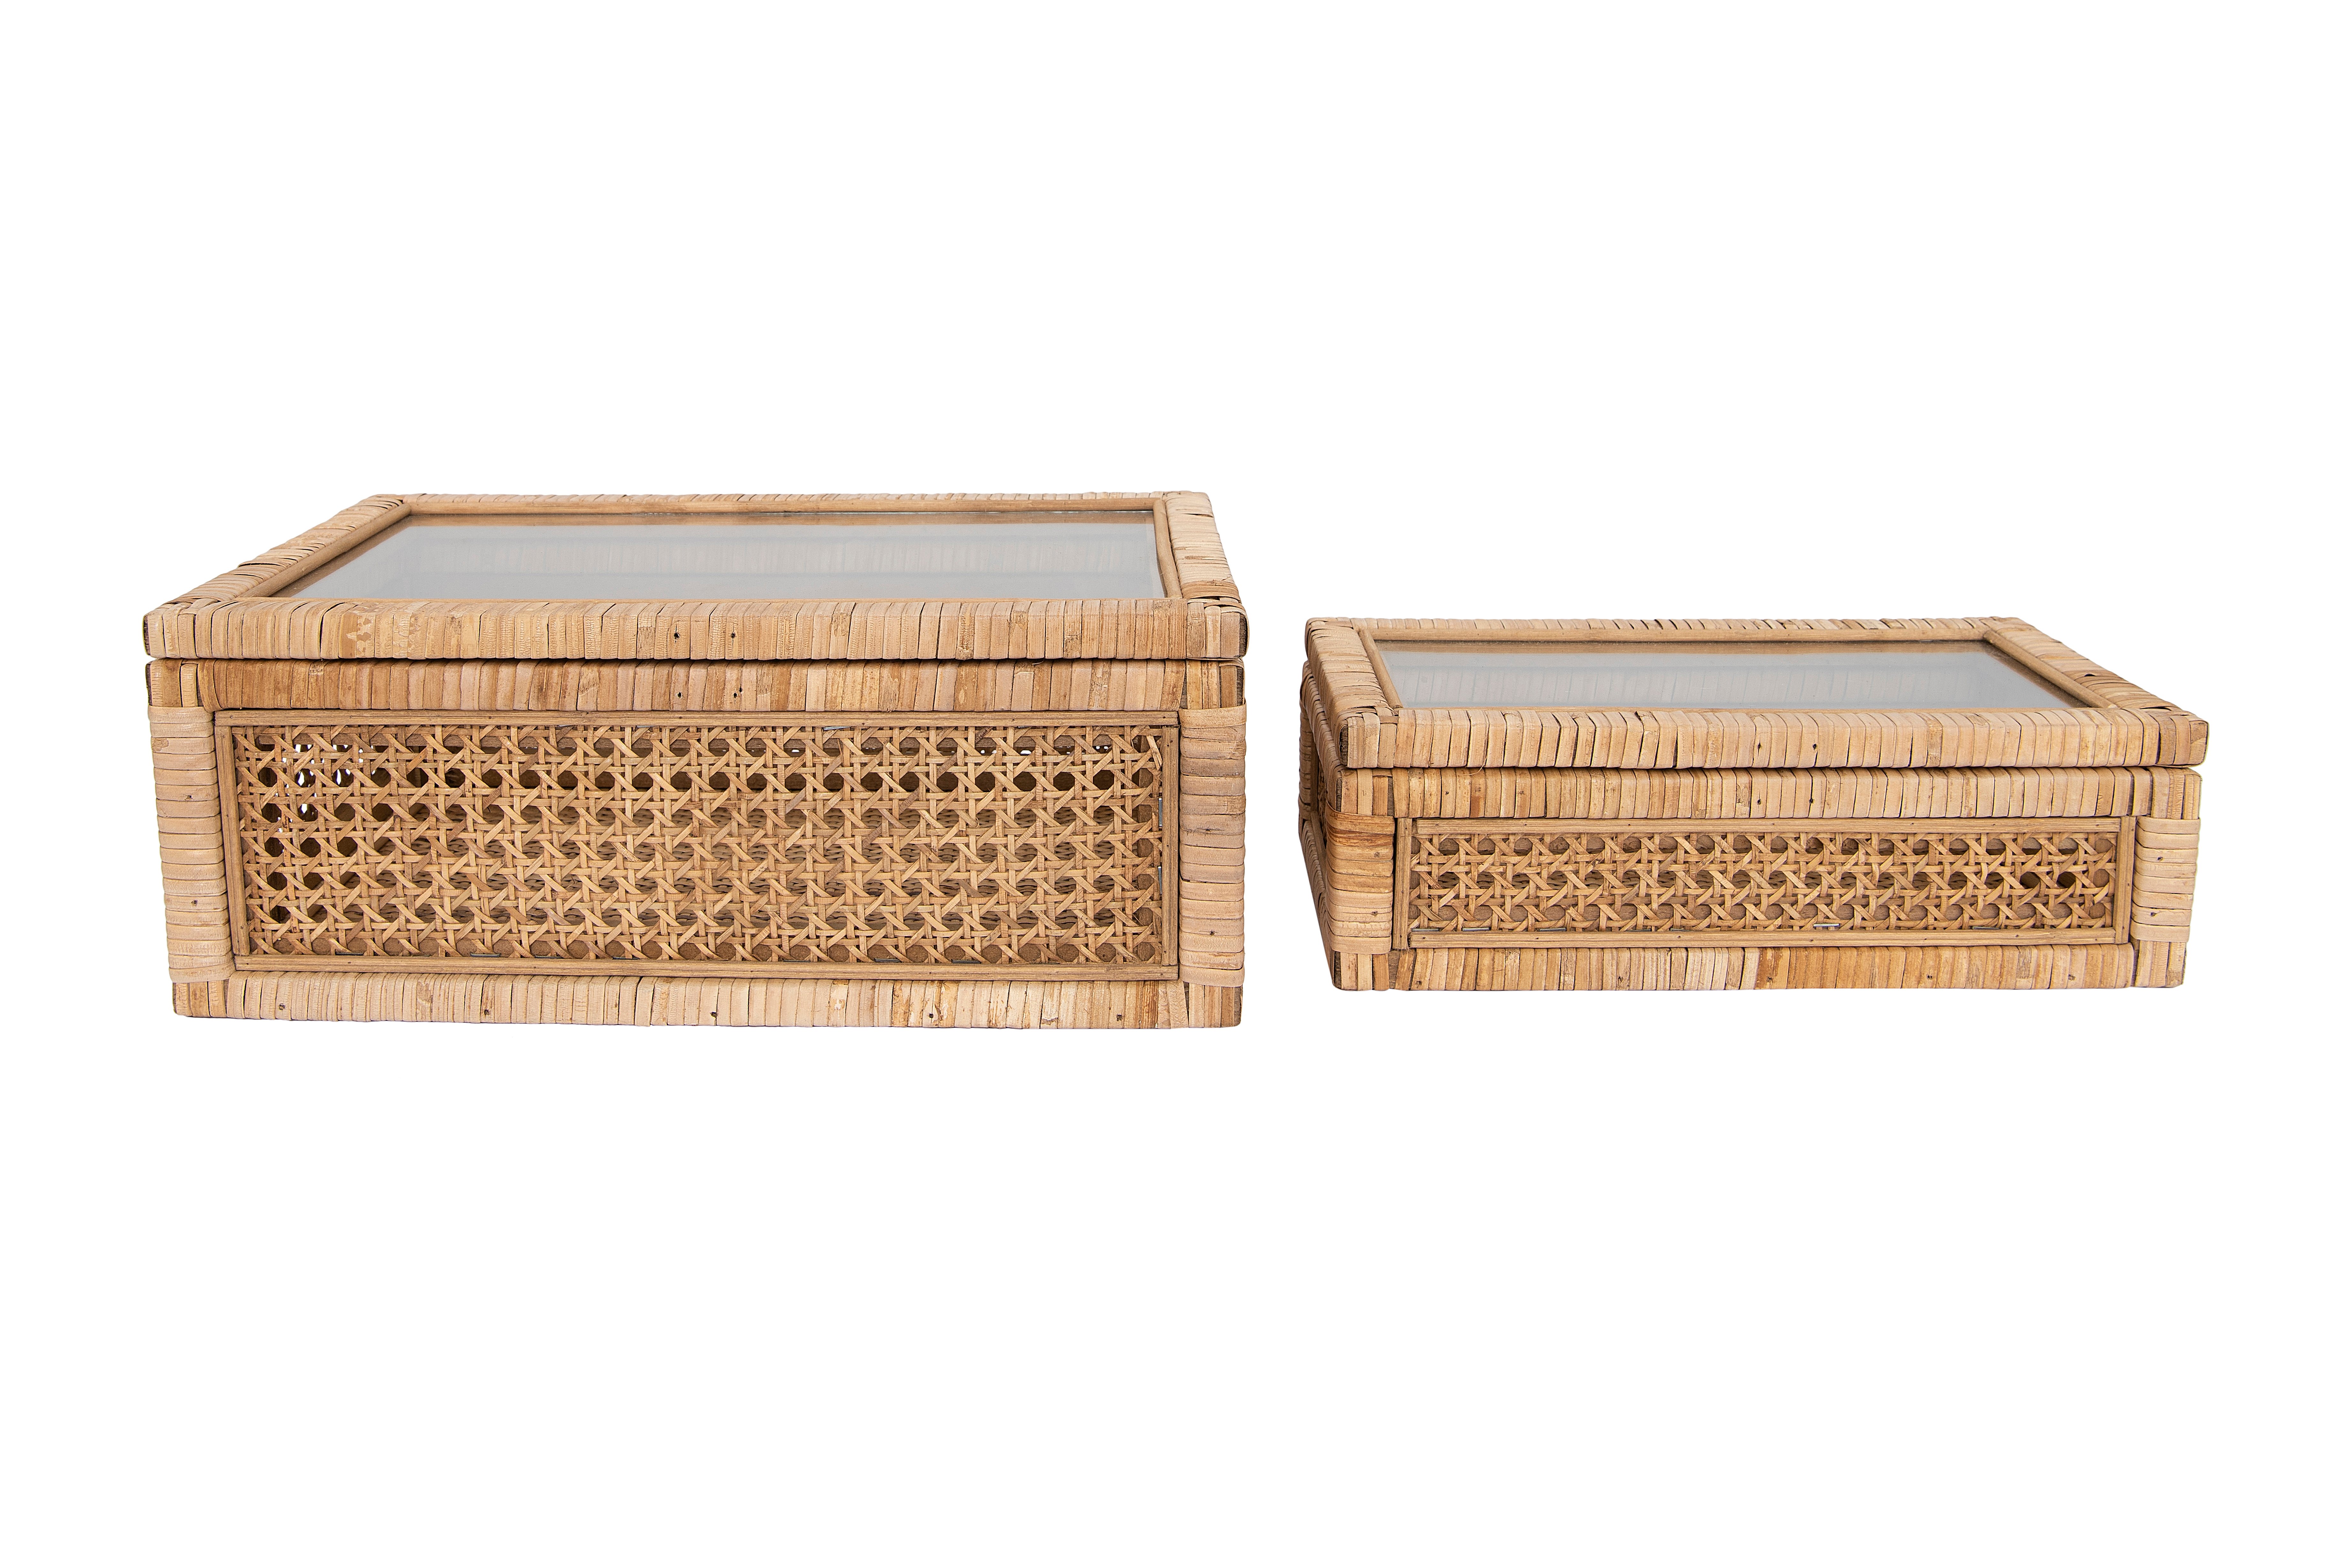 Woven Rattan Display Boxes with Glass Lids & Fir Wood Frame (Set of 2 Sizes) - Image 0